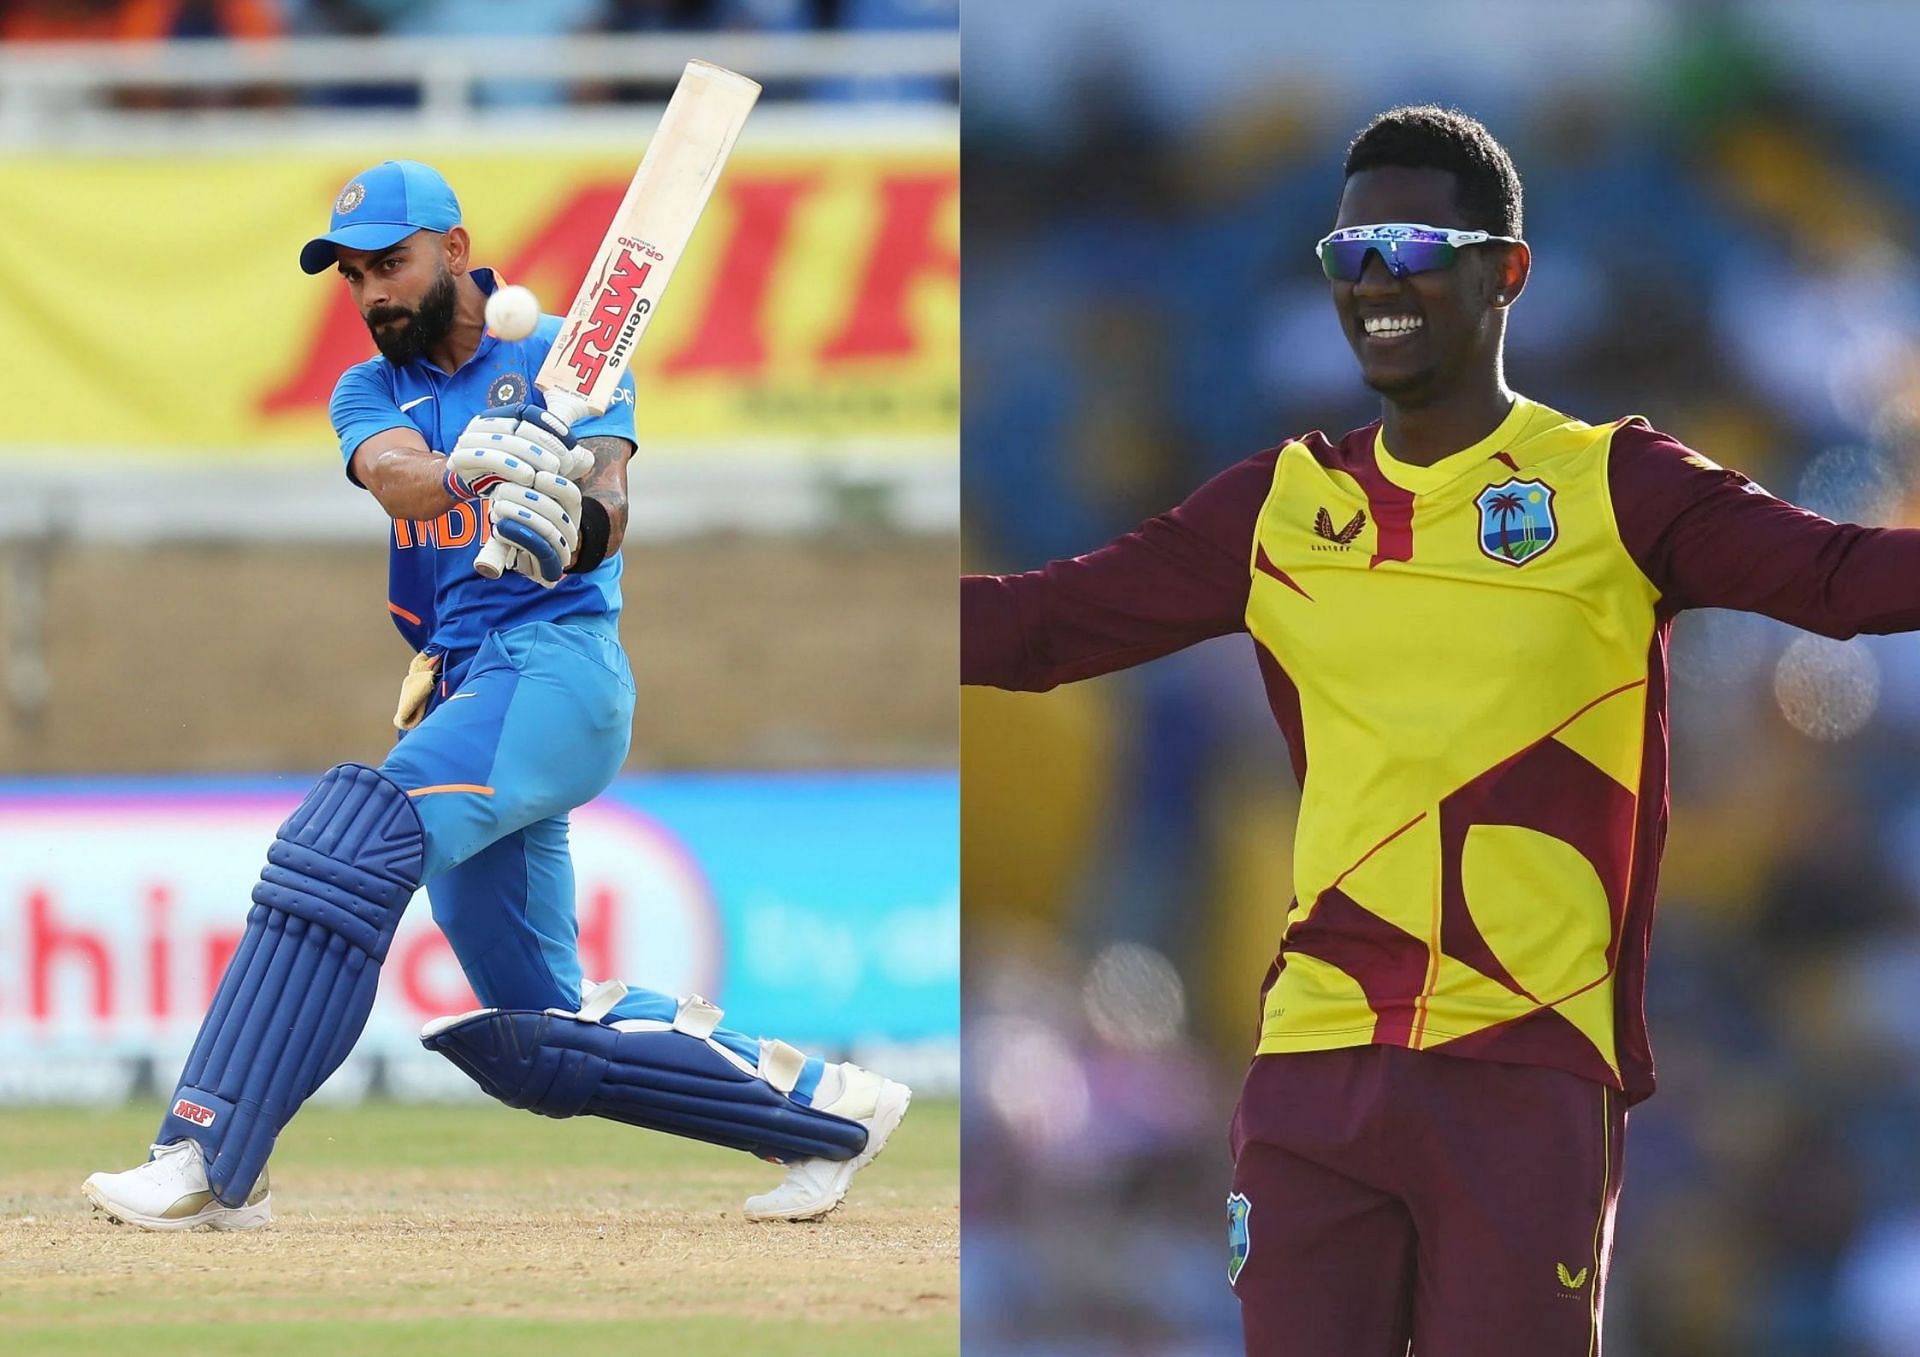 Virat Kohli versus Akeal Hosein could be a defining battle in the upcoming India-West Indies ODI series.